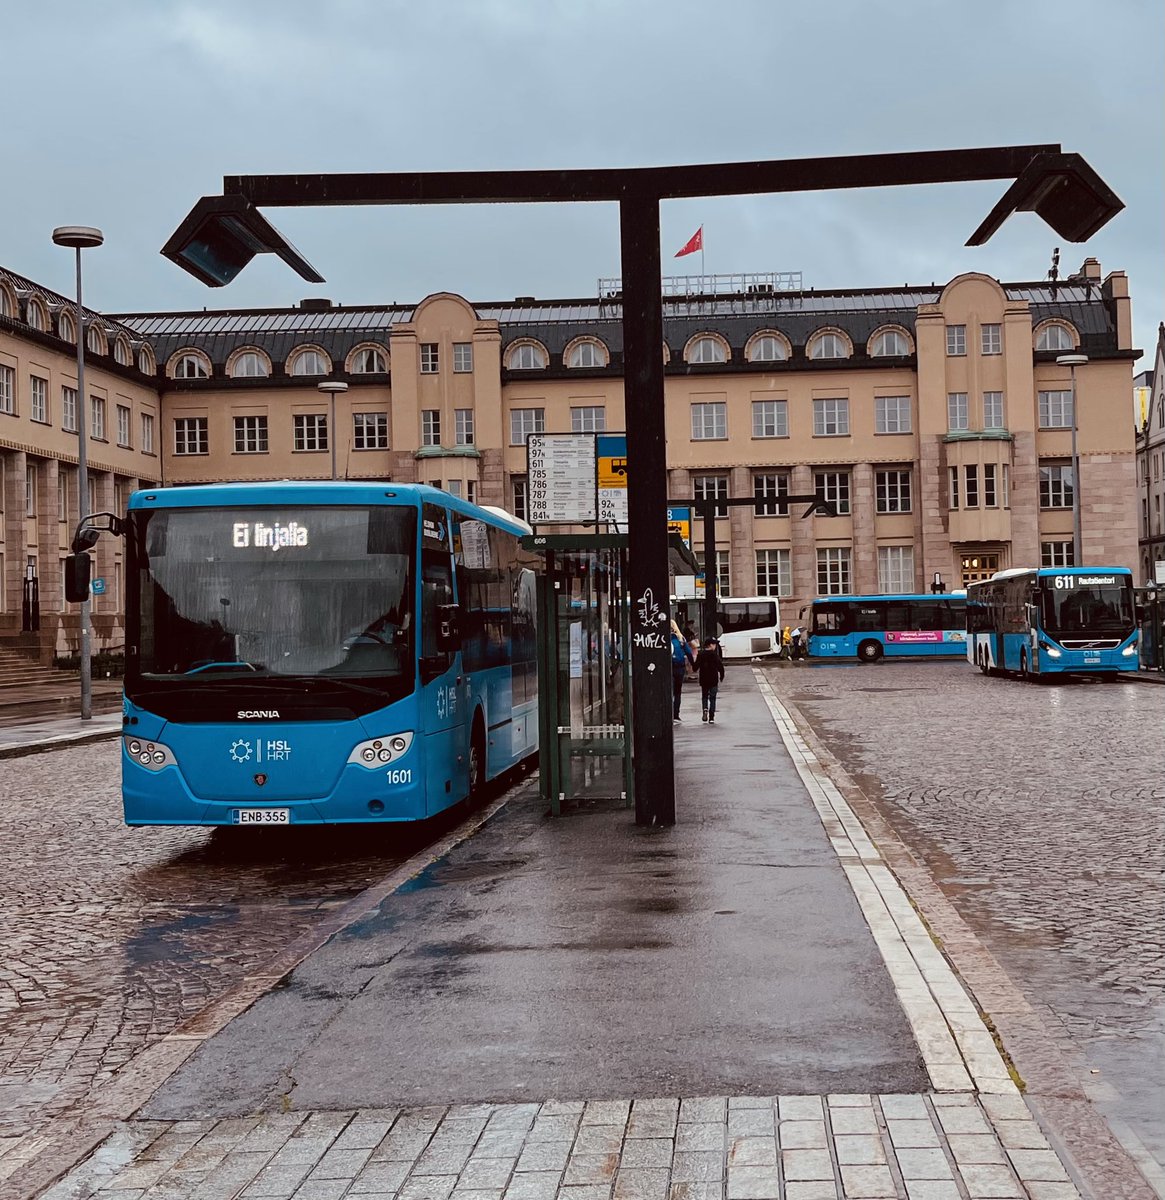 Artificial roofs for swallows and bats to nest under. Heated with the warmth eminating from standing city buses. Helsinki 2023.

@DesignFromTheF1 #nature #cityenvironment #birdnest #energyneutral #ecodiversity #swallows #bats https://t.co/K2SZMBzN5I